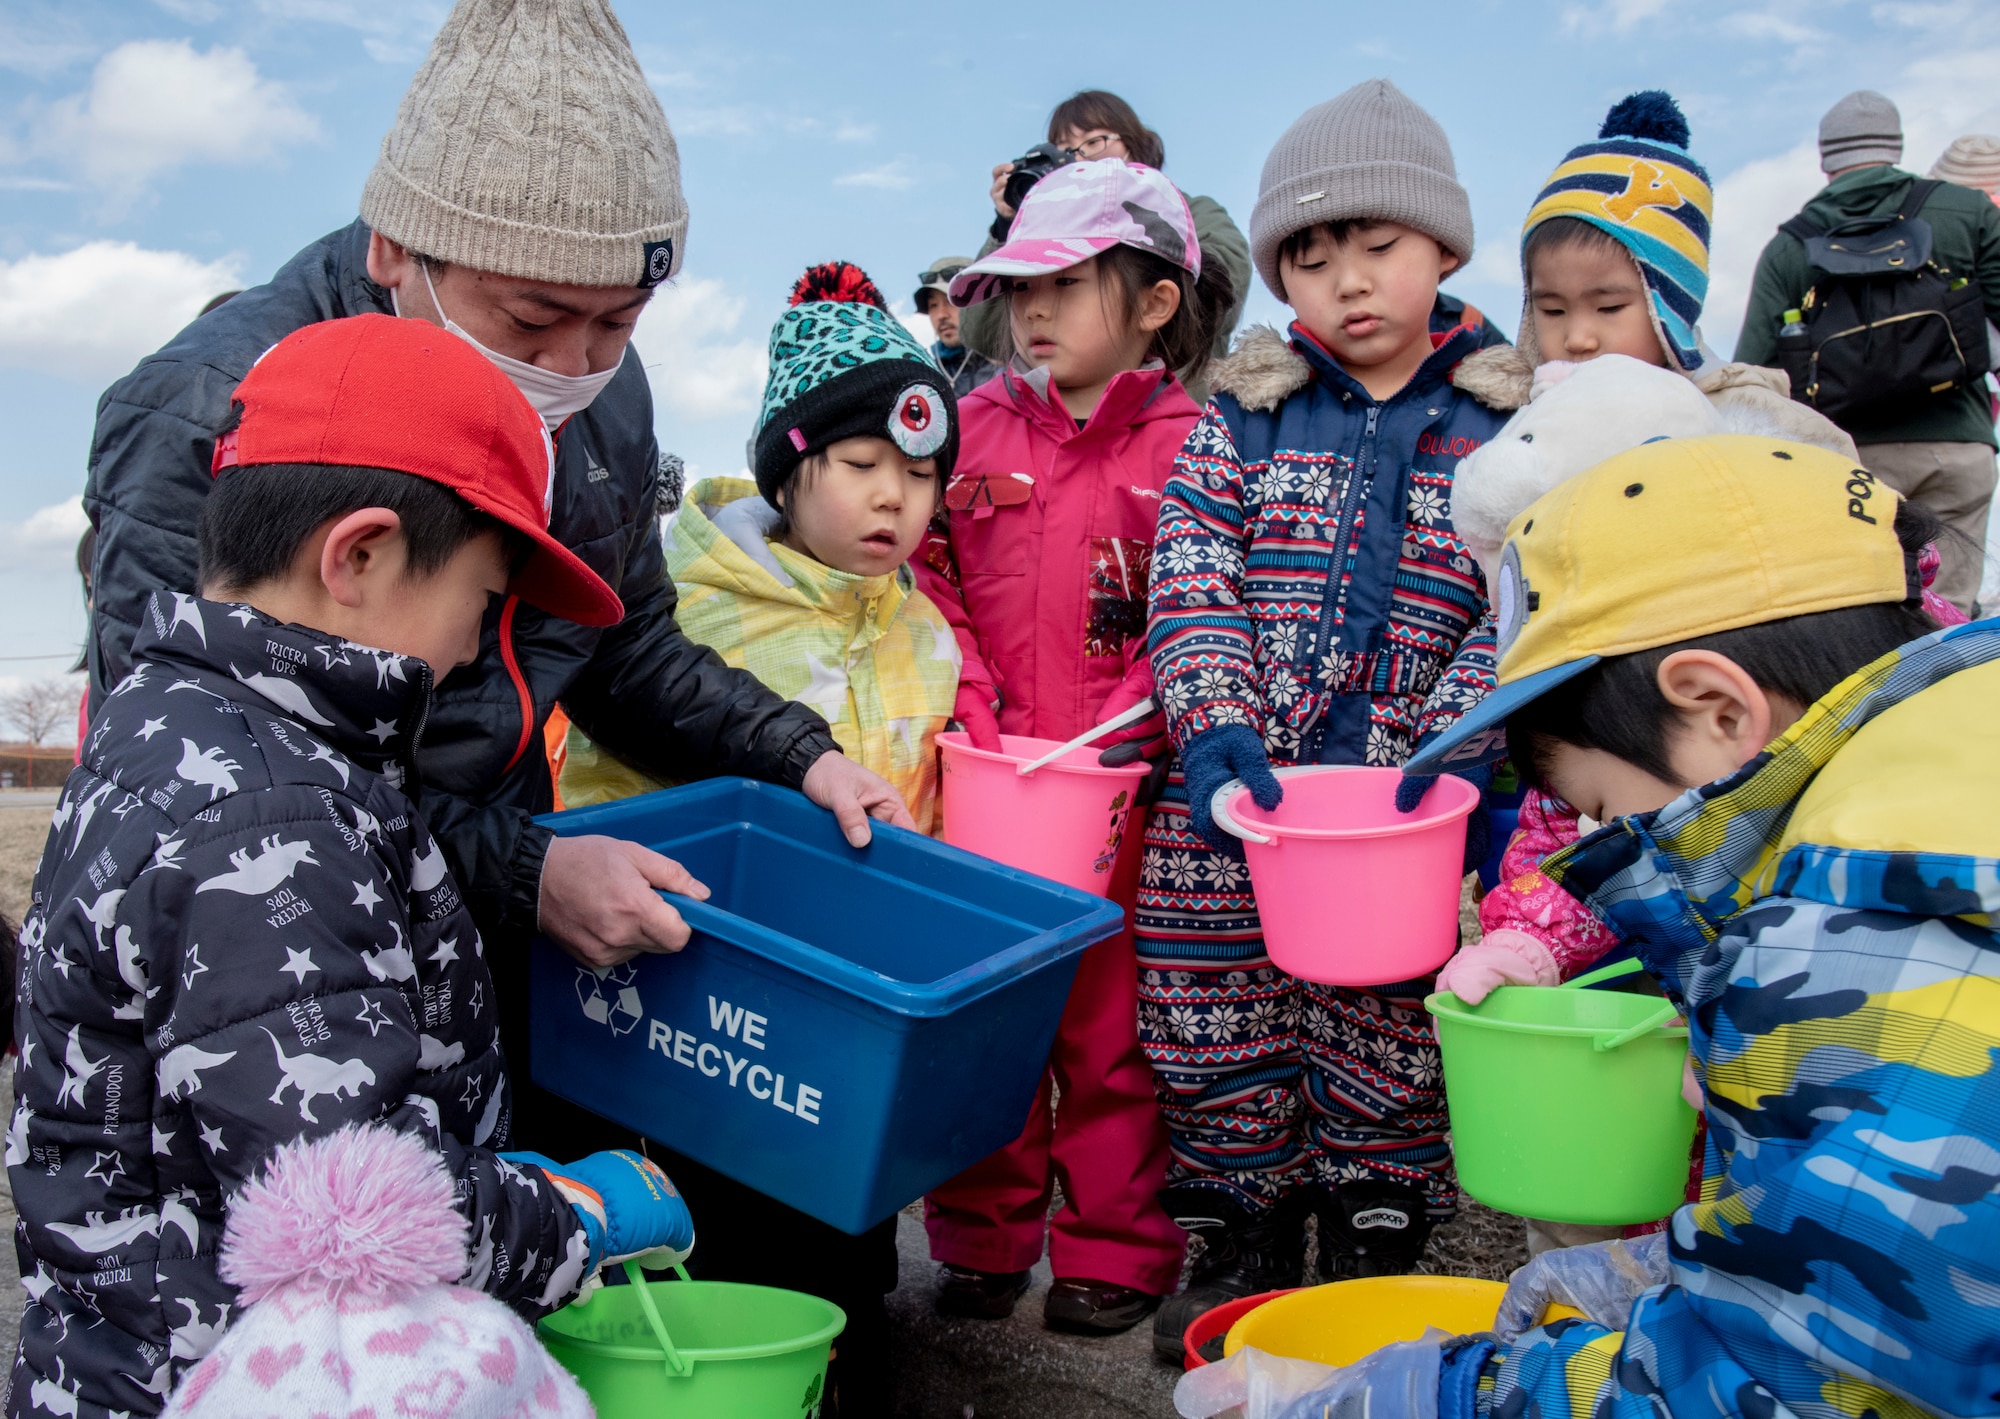 Japanese children wait for the start of the 22nd Annual Baby Salmon Release at Shimoda Salmon Park, Japan, March 16, 2019. The park conducts this bilateral event as part of Earth Day, encouraging awareness and appreciation for the environment.